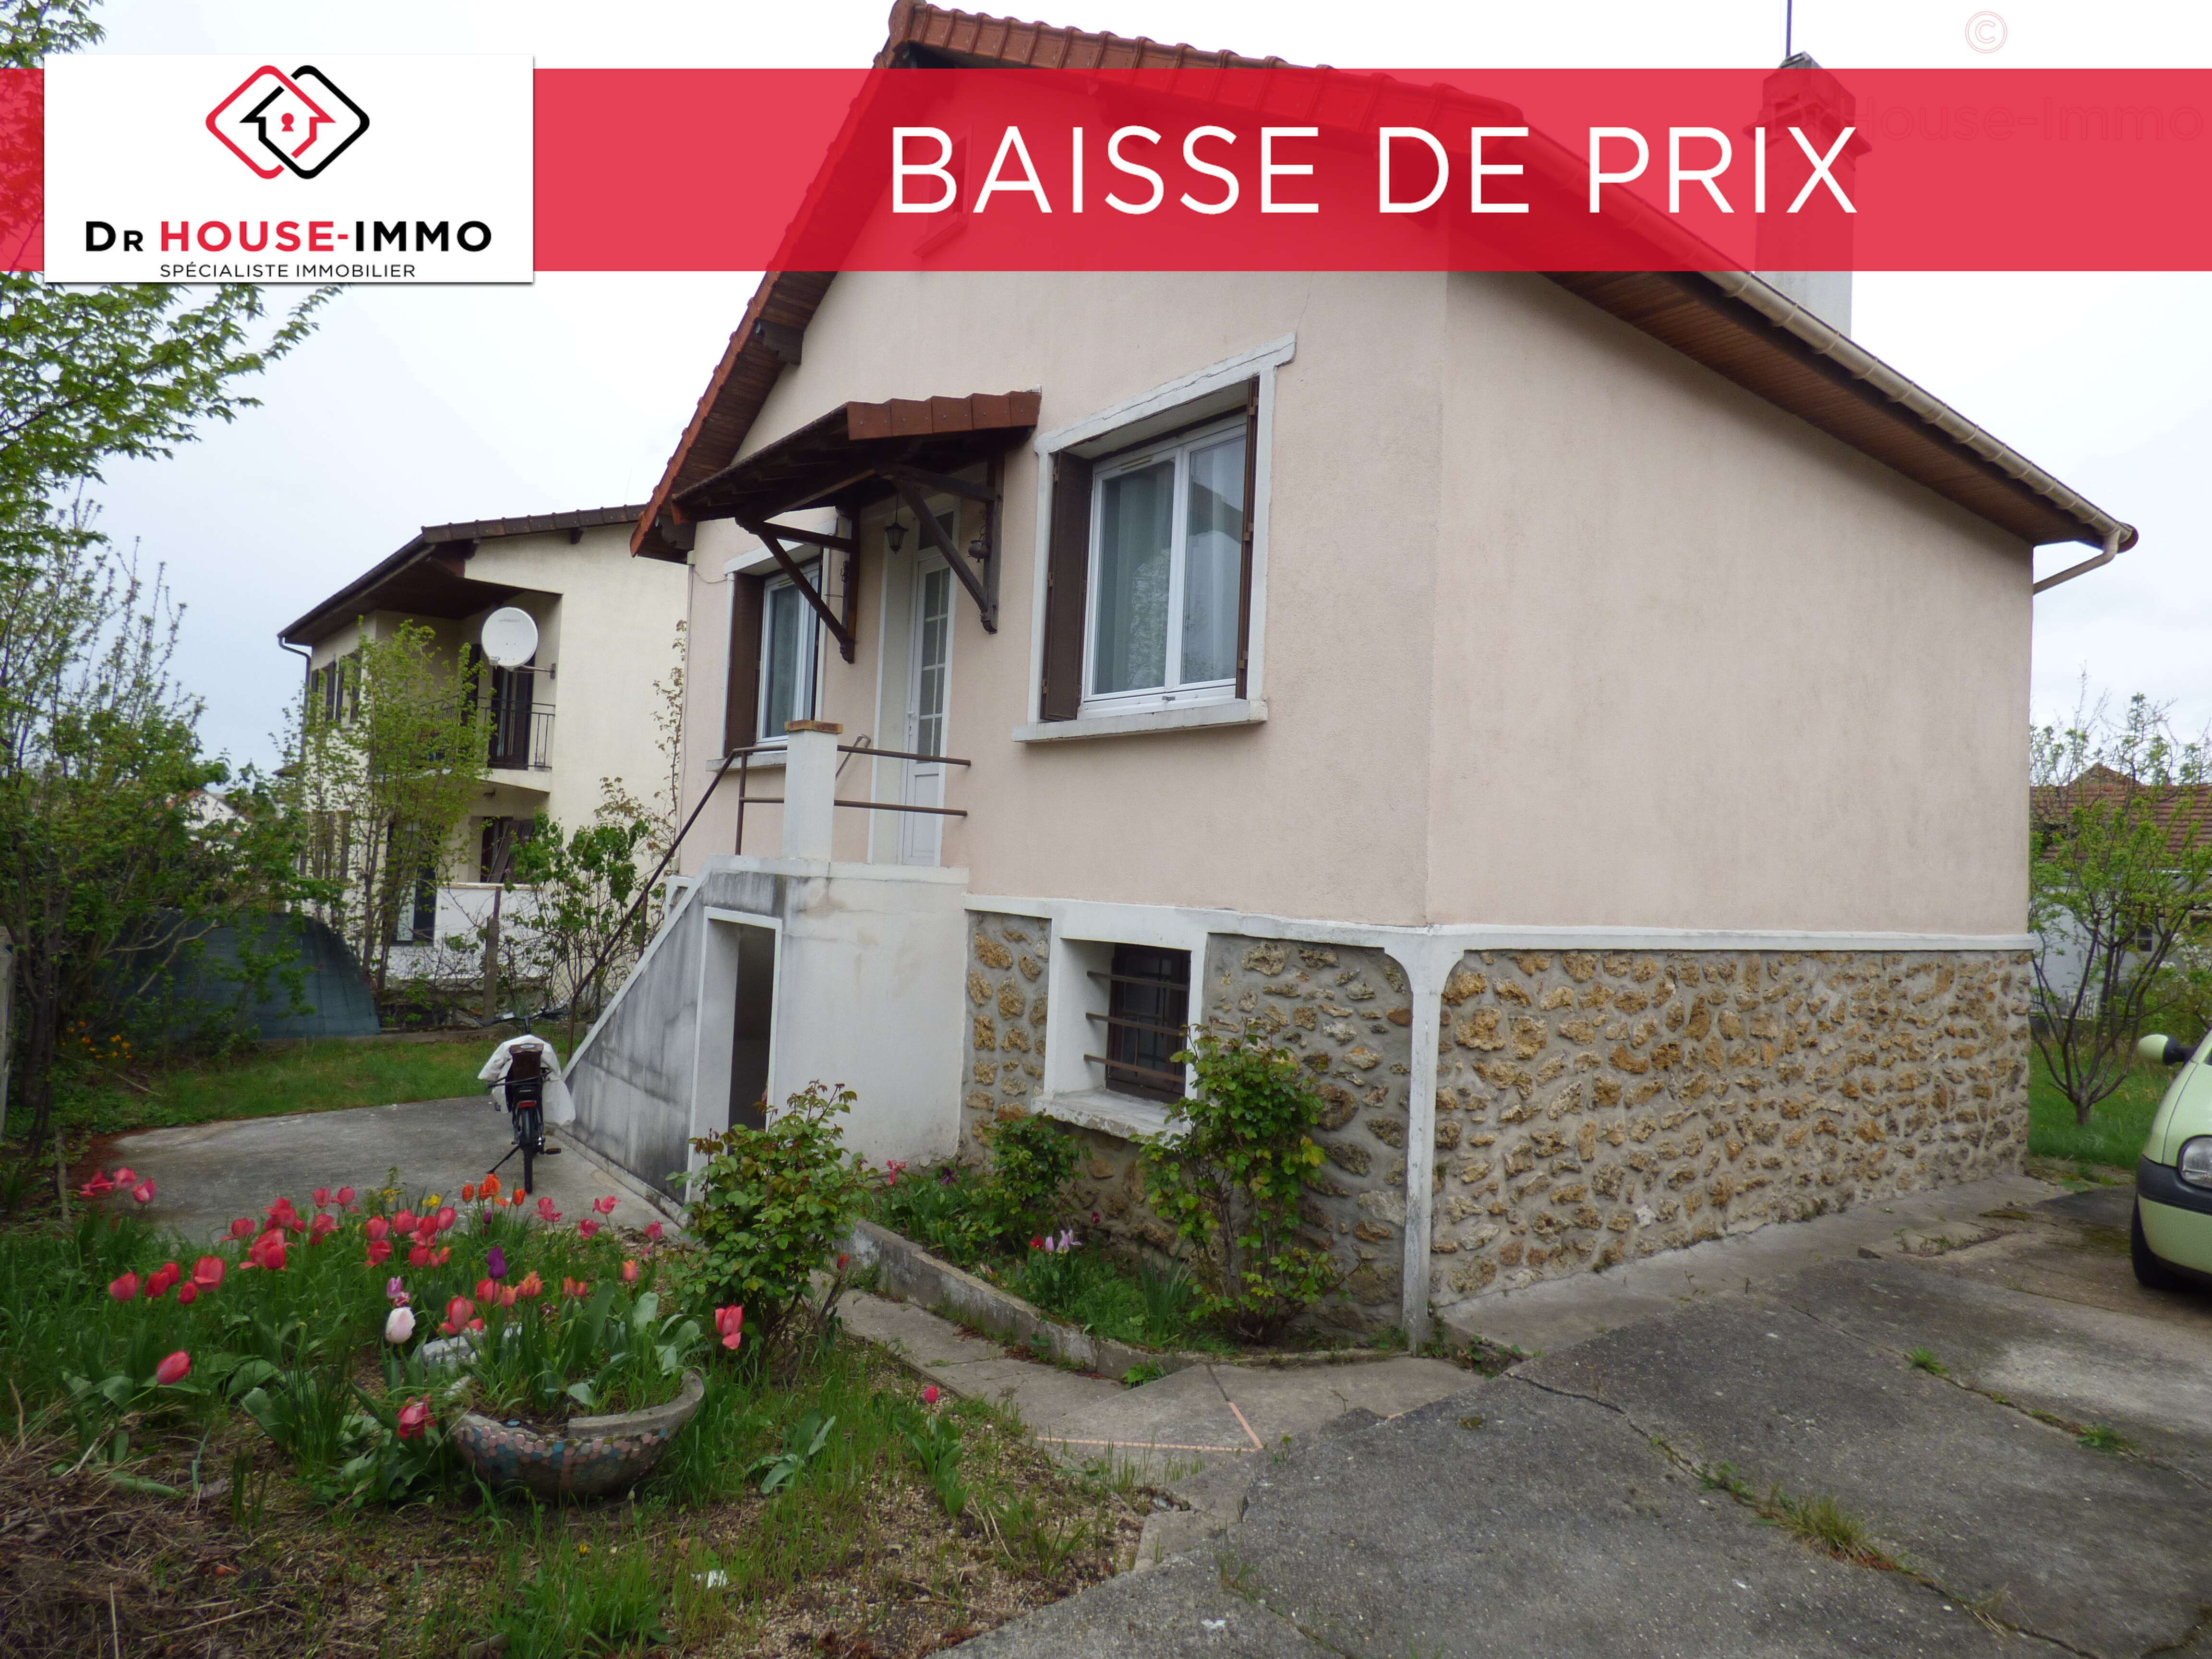 Maison 5 pièces 93 m² Coeuilly